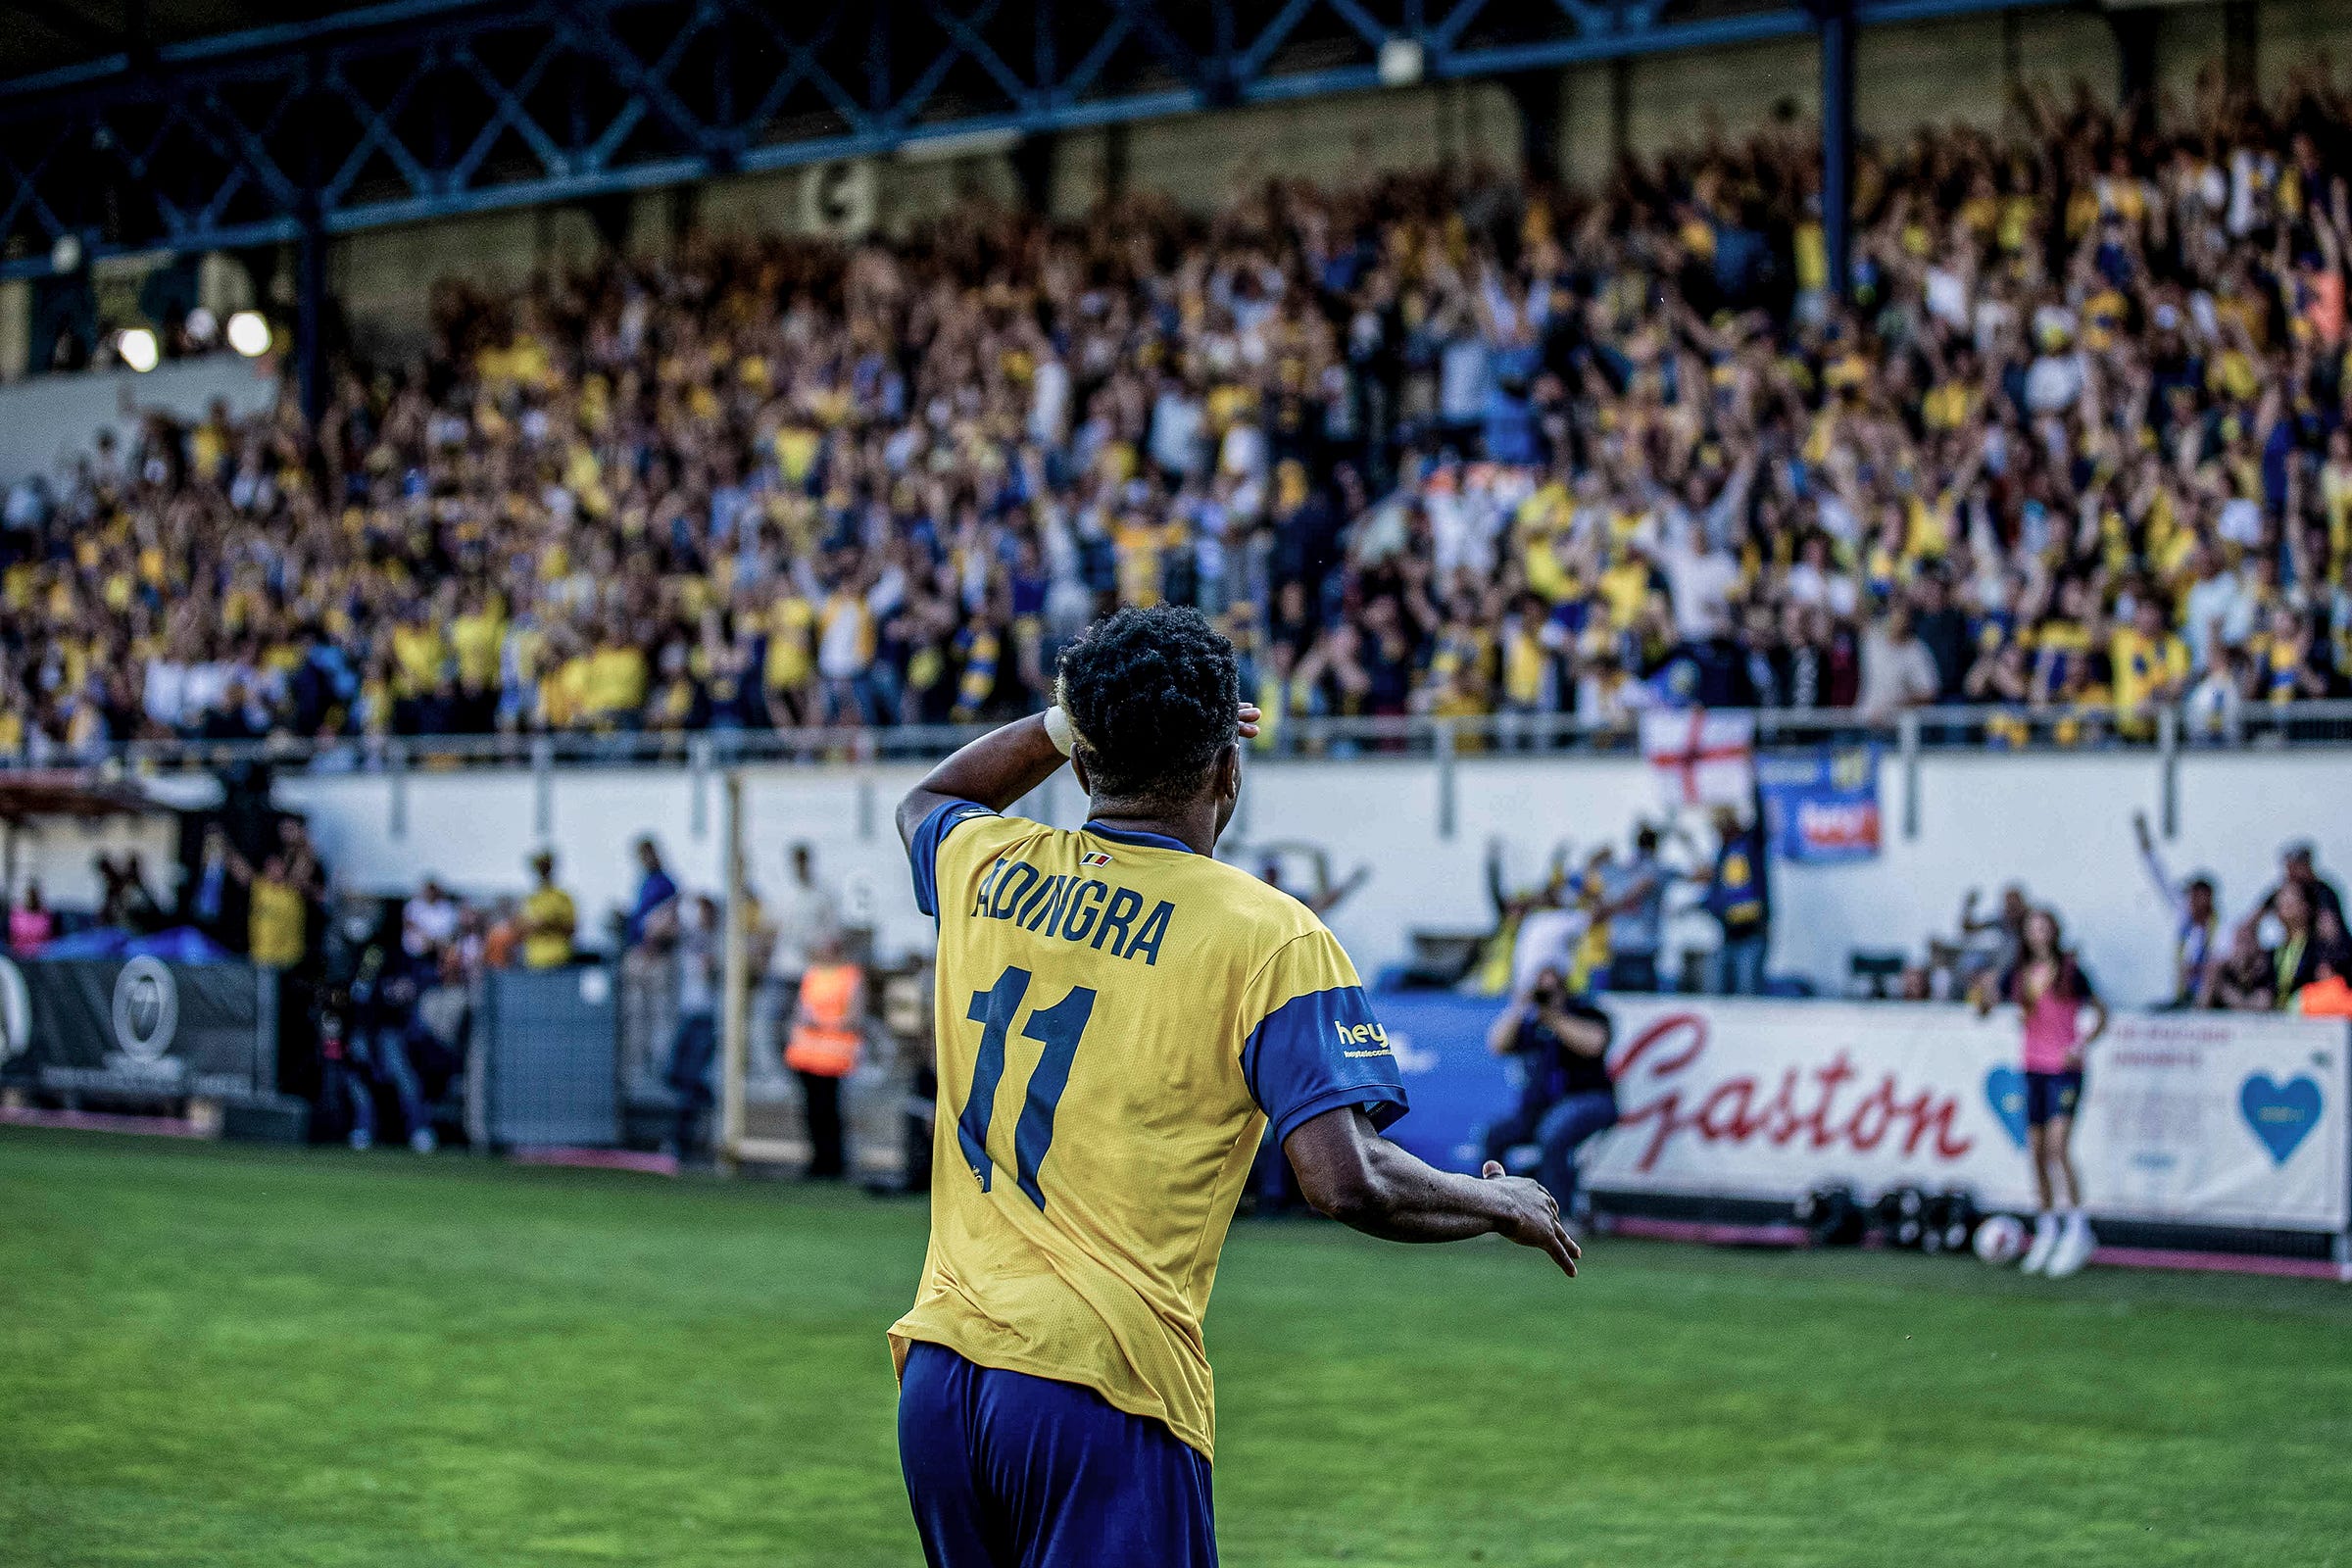 A photo of Simon Adingra from behind with fans celebrating in the background